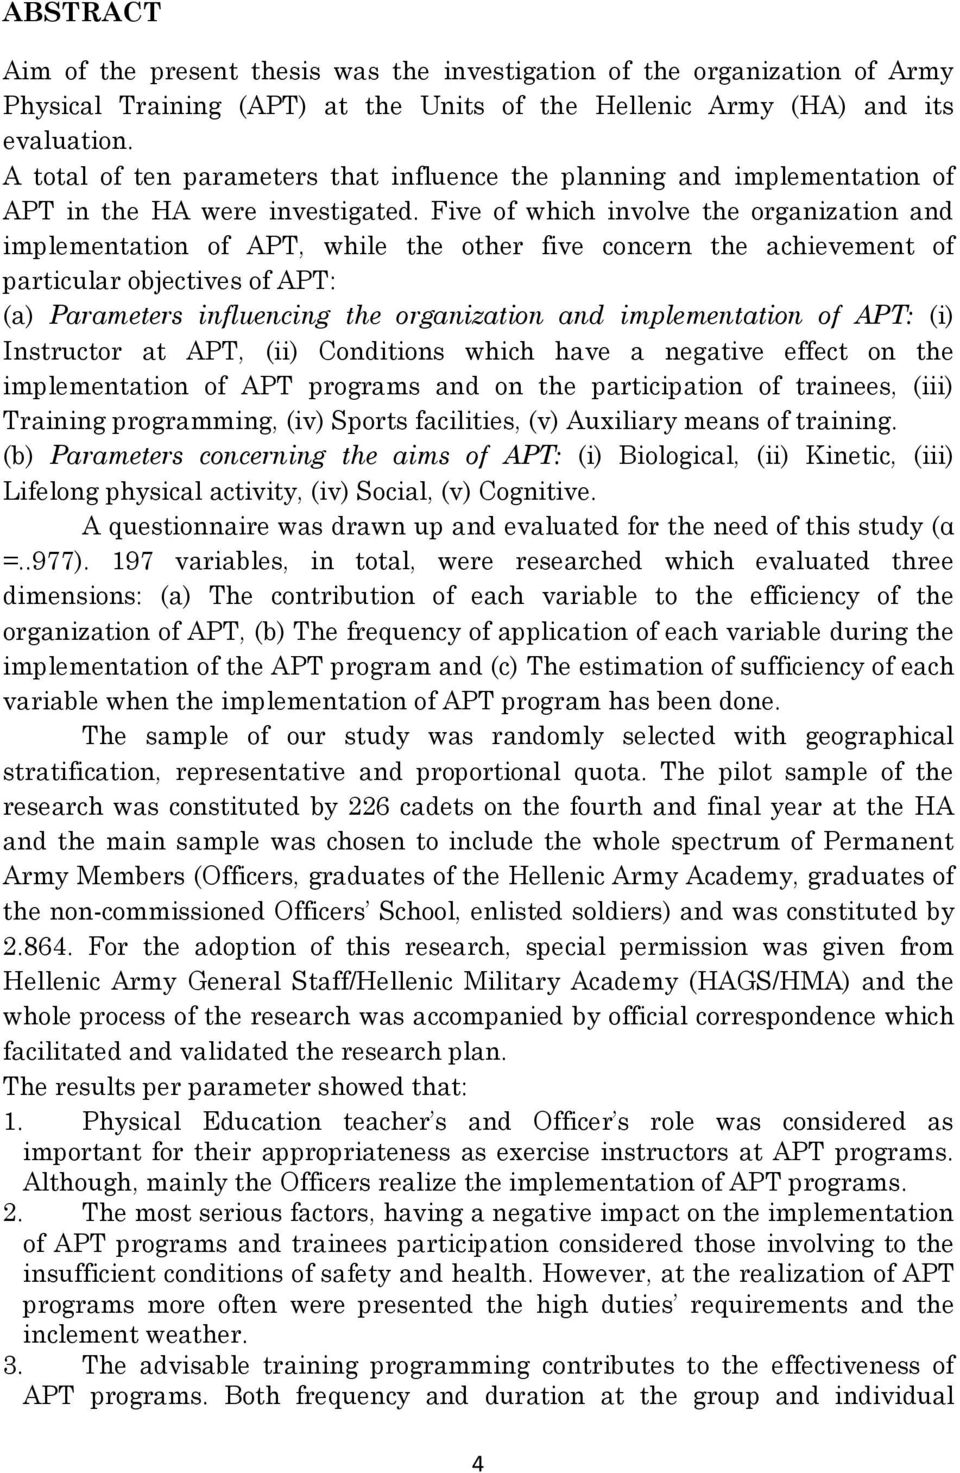 Five of which involve the organization and implementation of APT, while the other five concern the achievement of particular objectives of APT: (a) Parameters influencing the organization and